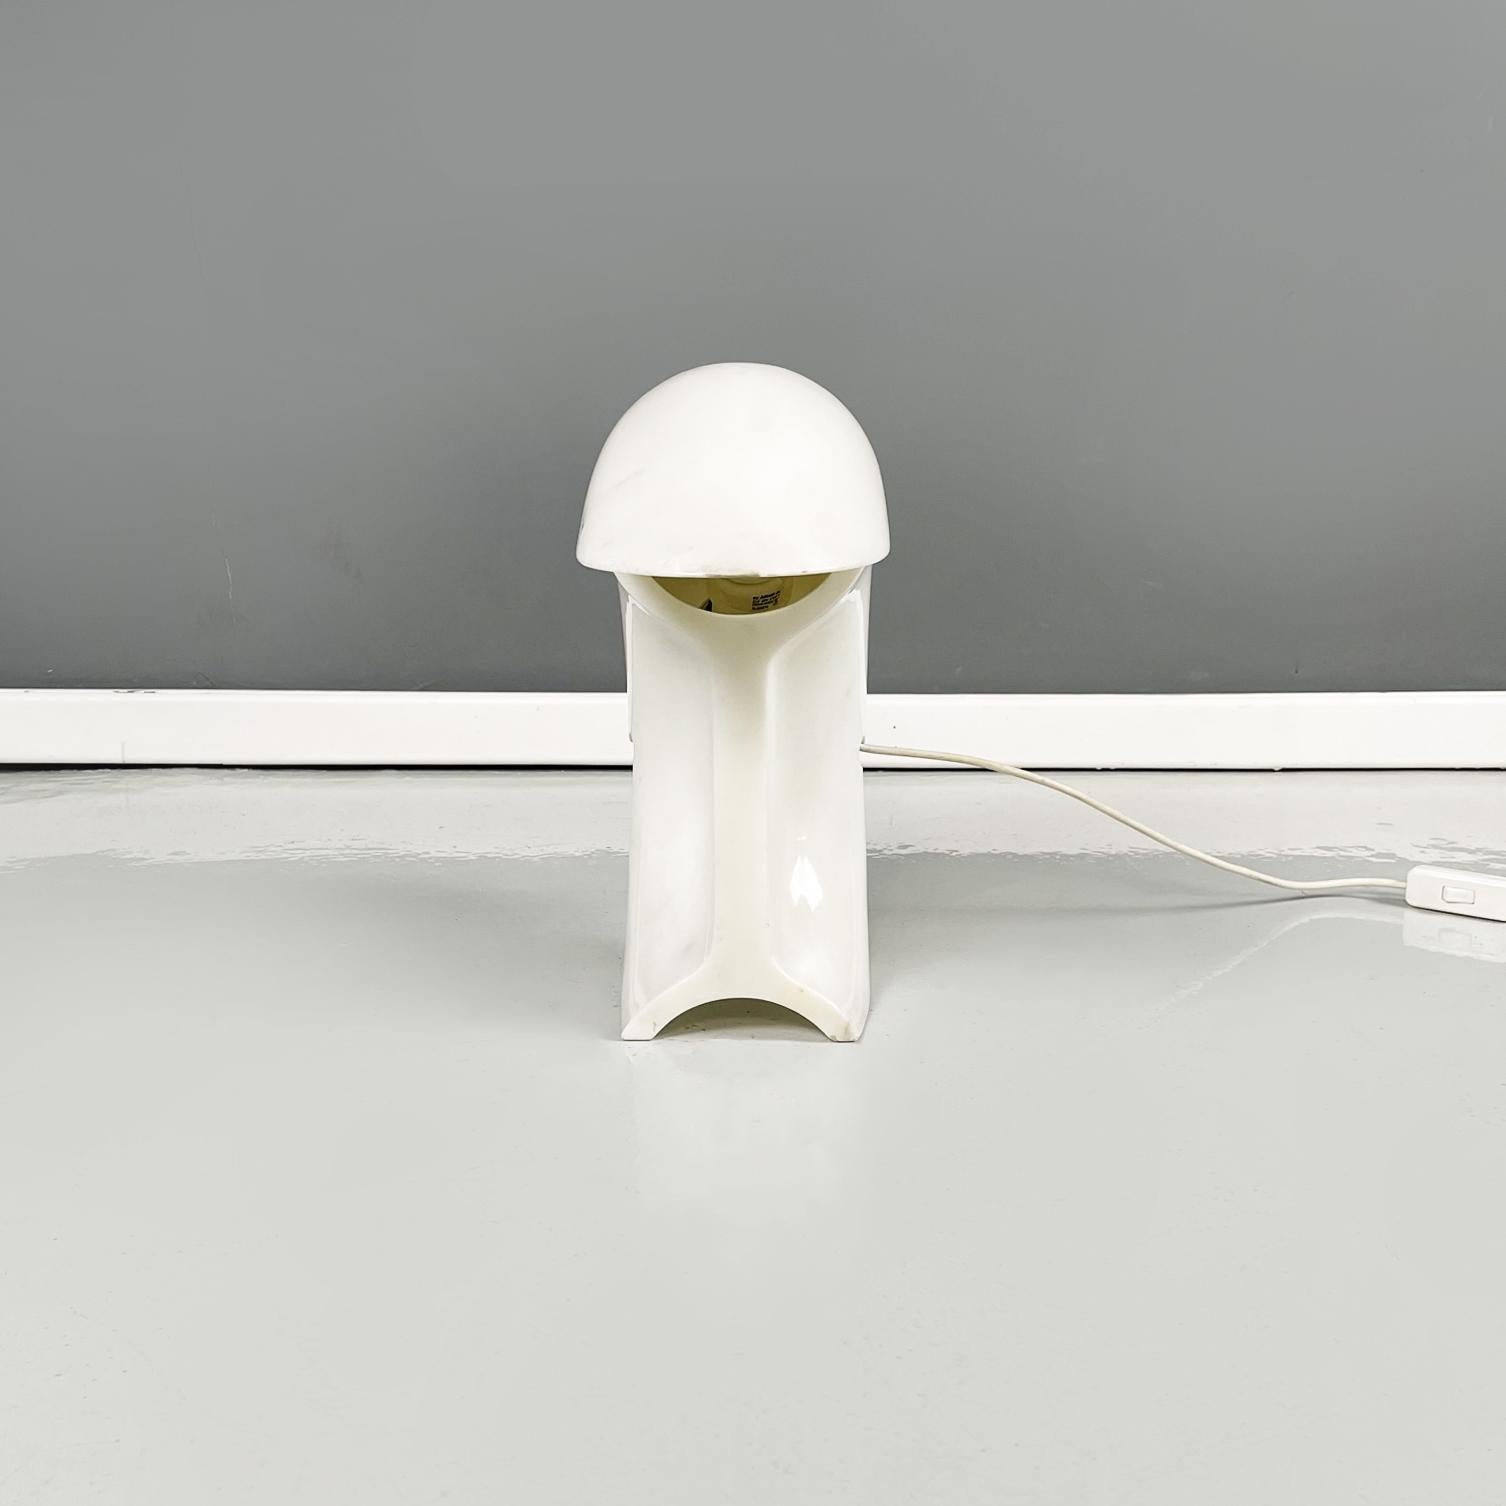 Italian modern Carrara marble table lamp Biagio by Tobia Scarpa for Flos, 1970s
Iconic and fantastic table lamp mod. Biagio with direct light and rounded structure obtained from a single block of white Carrara marble. The light source is located